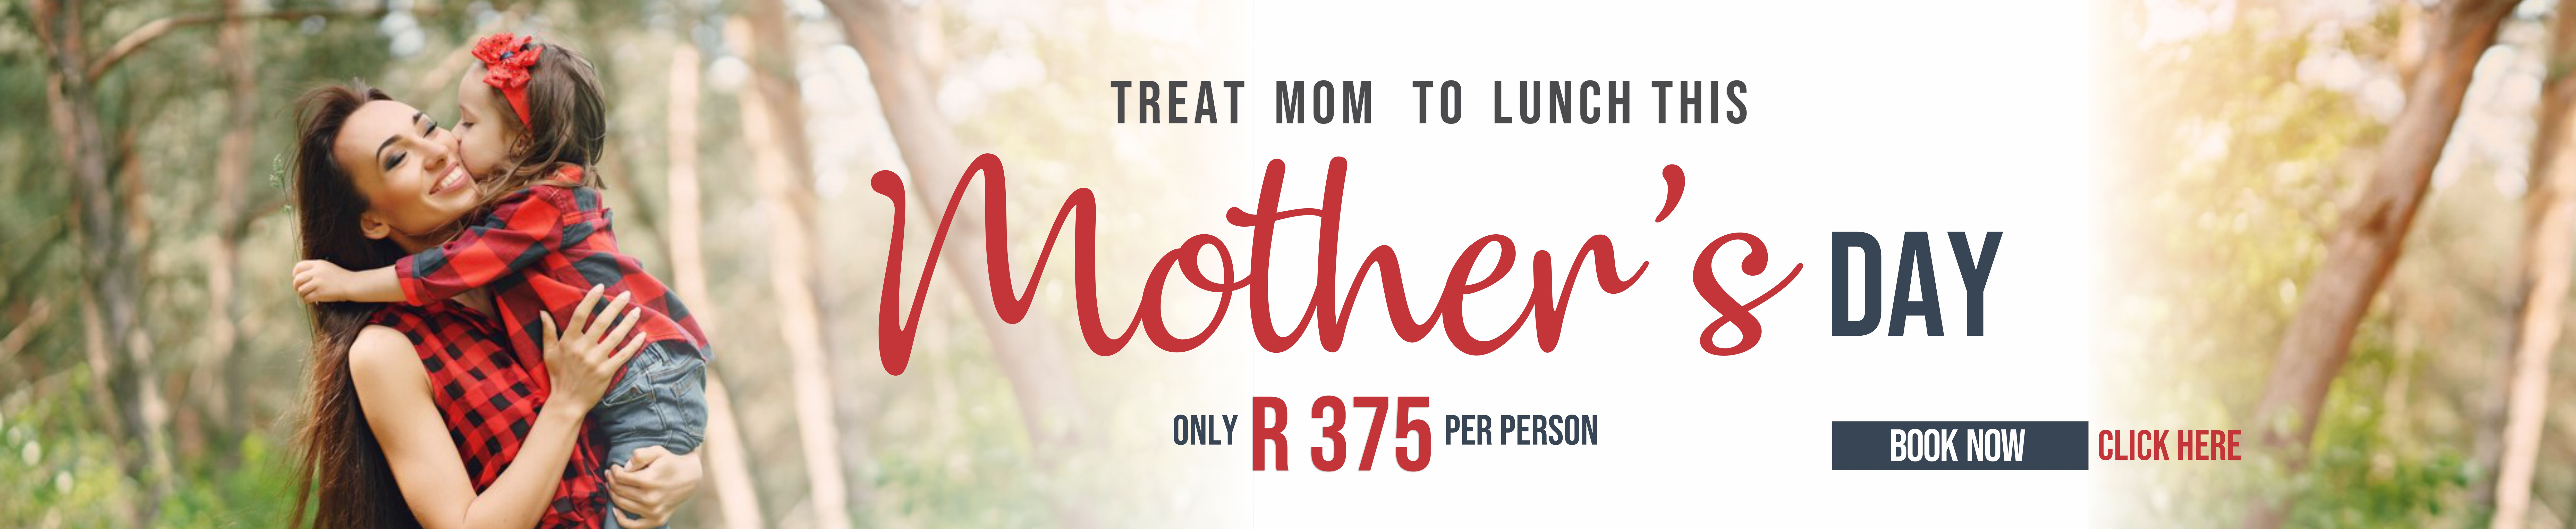 Join us for Mother's Day lunch at Kedar Heritage Lodge, Rustenburg